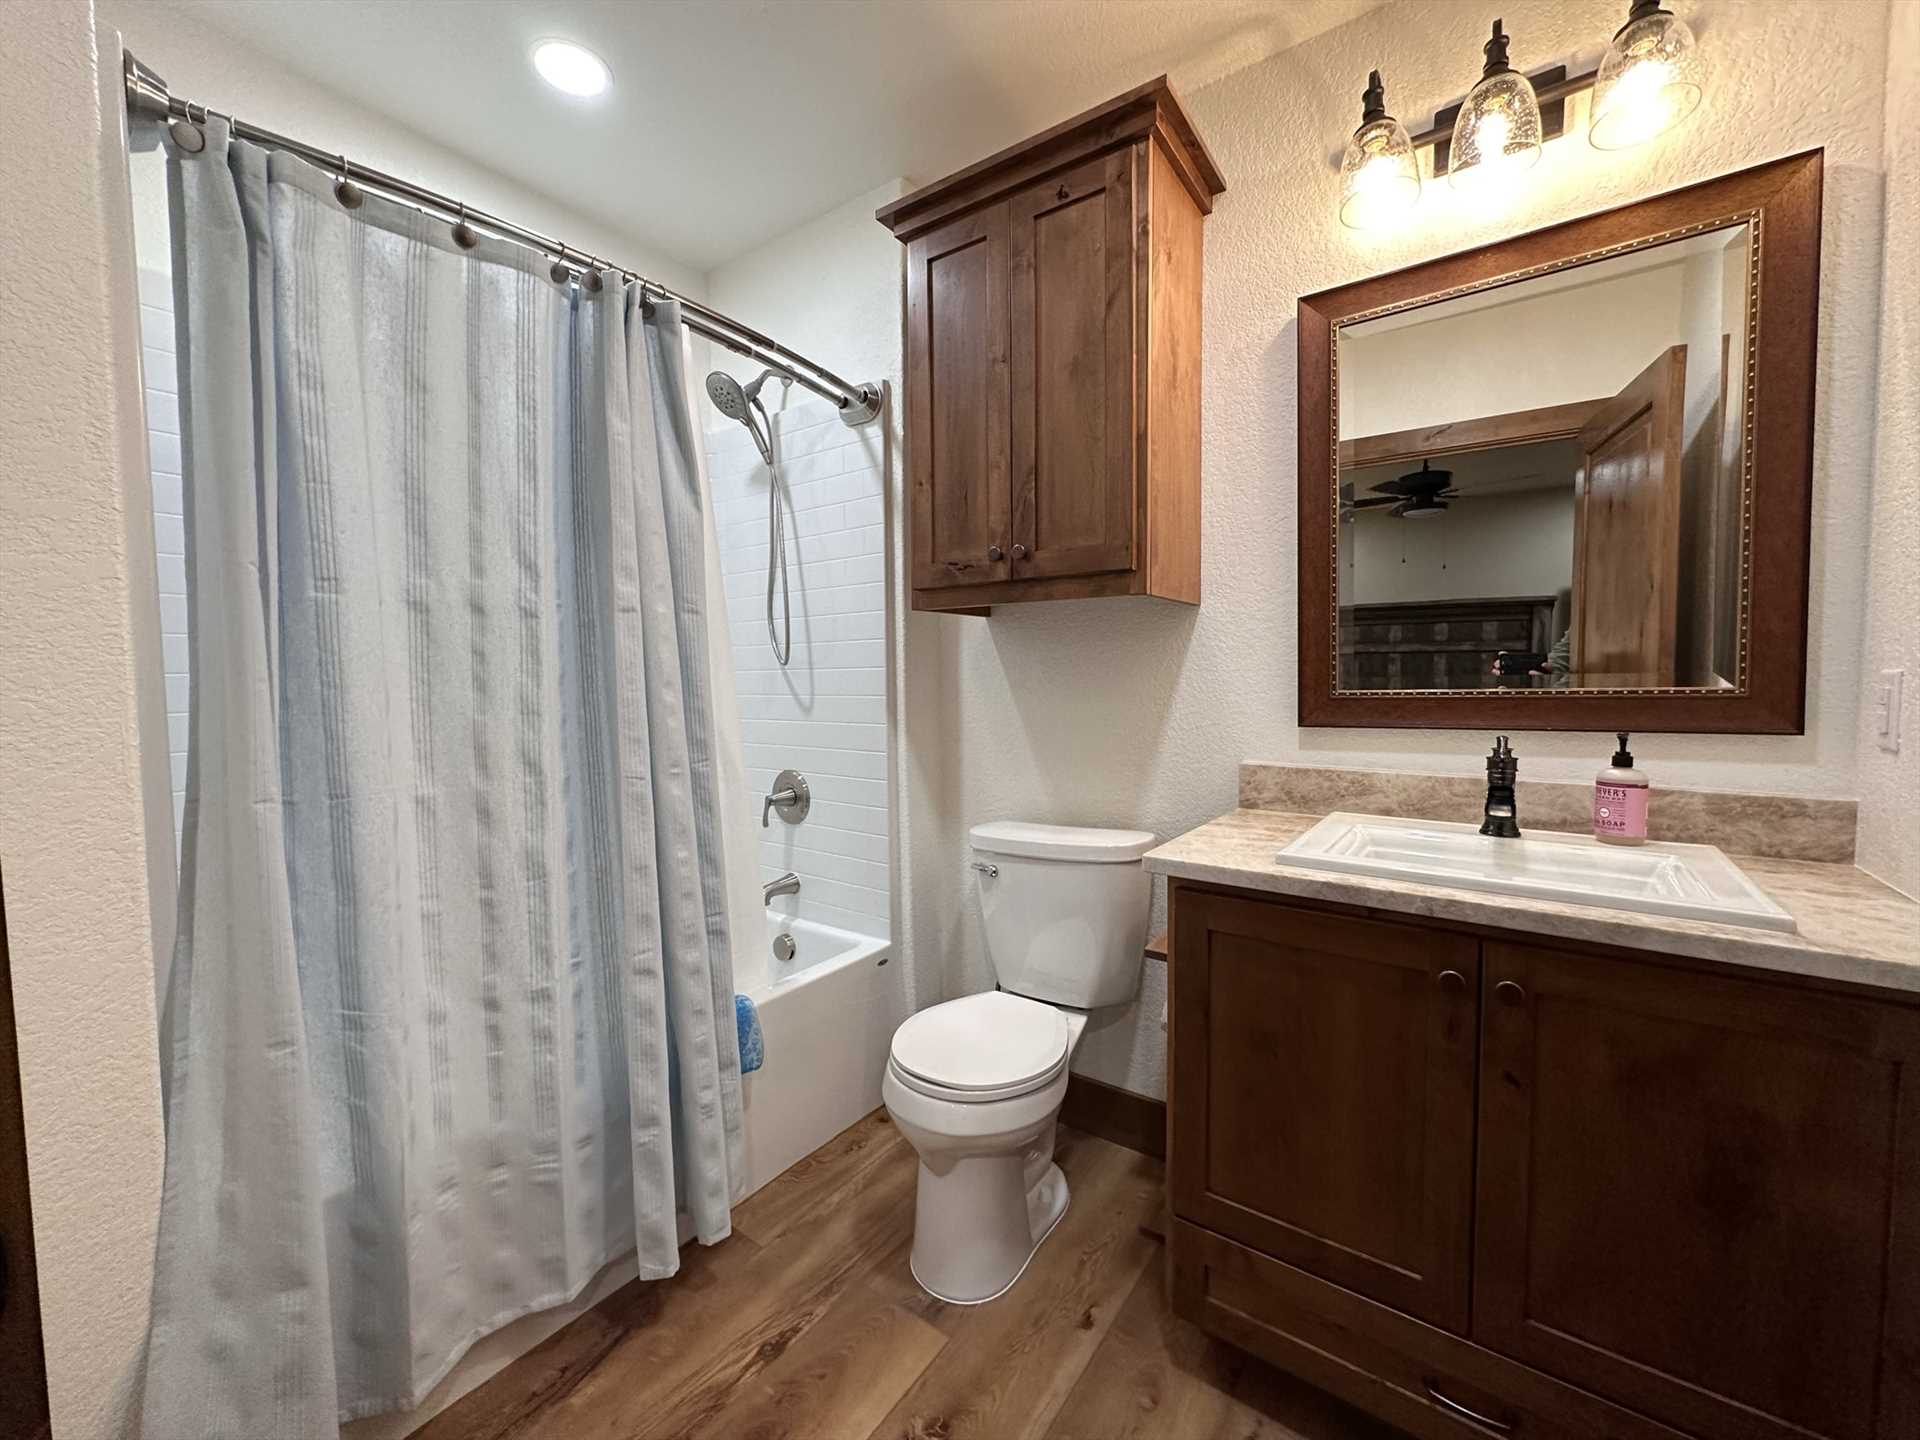                                                 With five full baths for 14 people, everyone will have their time and space for cleanup and other necessities! There are also laundry facilities on-site.